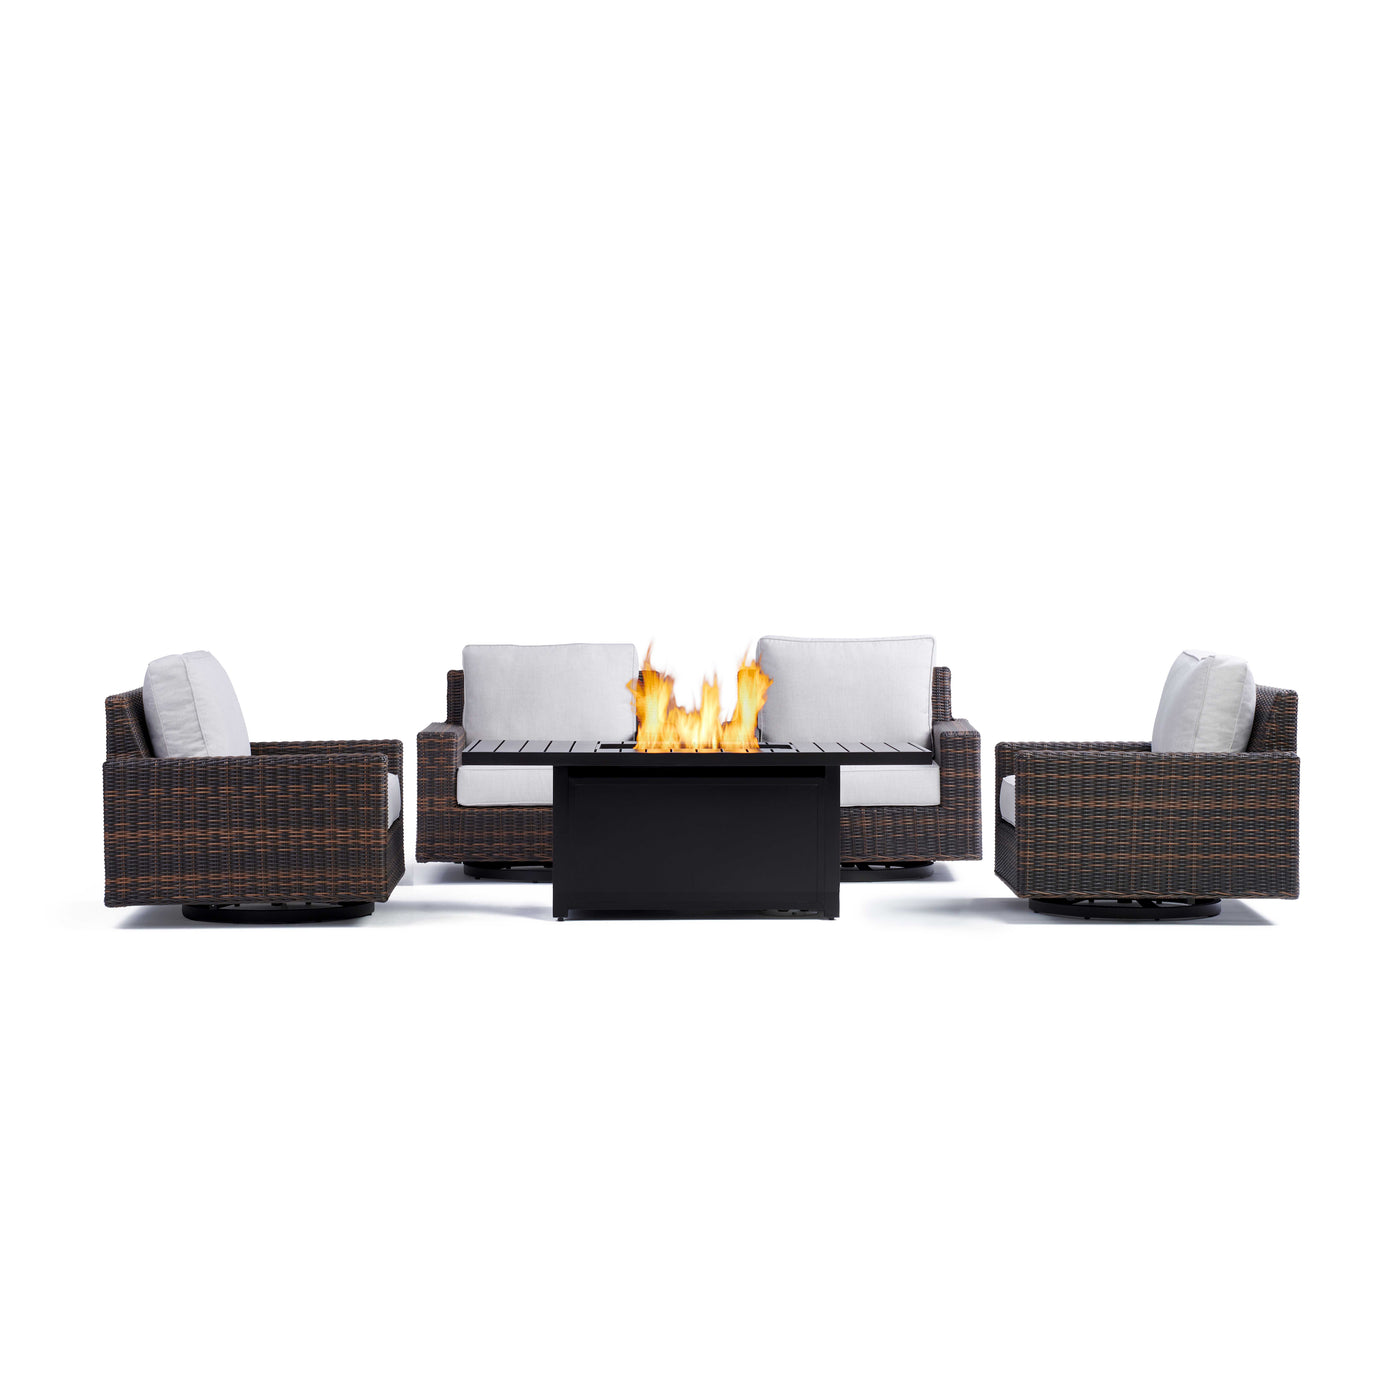 Yardbird Langdon Outdoor Fire Pit Table Set with 4 Swivel Glider Chairs Outdoor Furniture